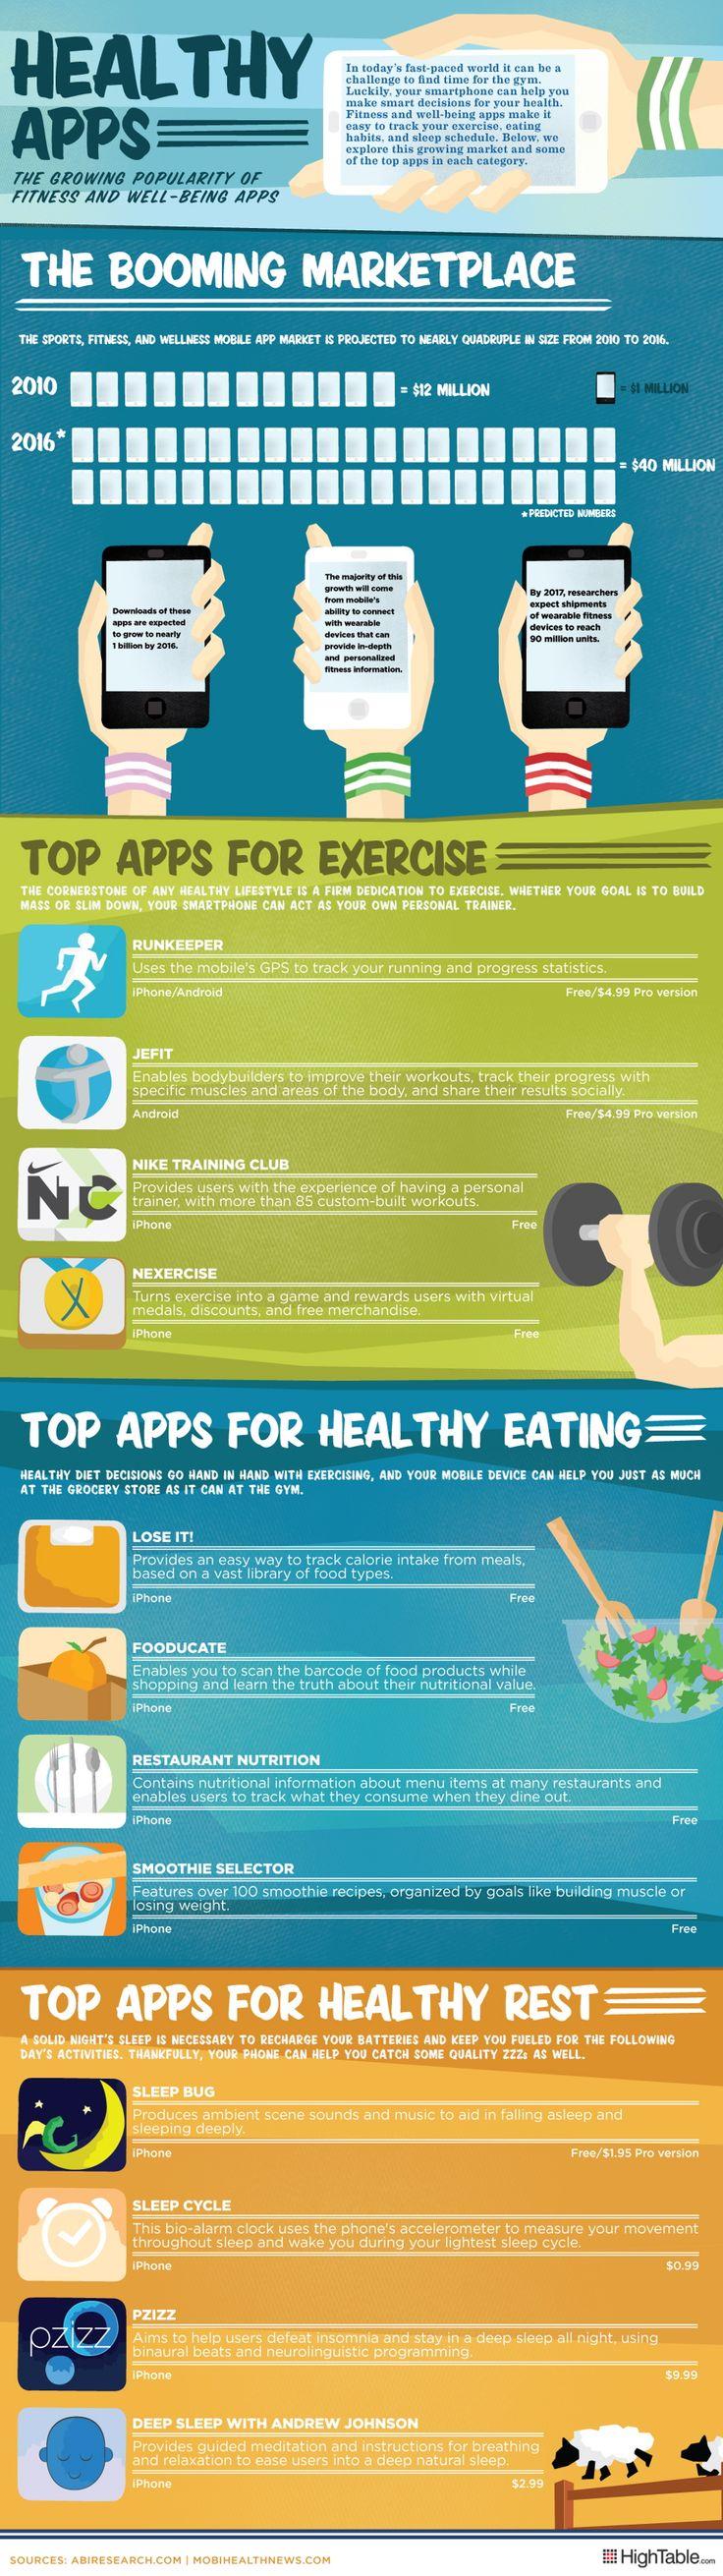 Wedding - Healthy Apps To Help You Stay Healthy